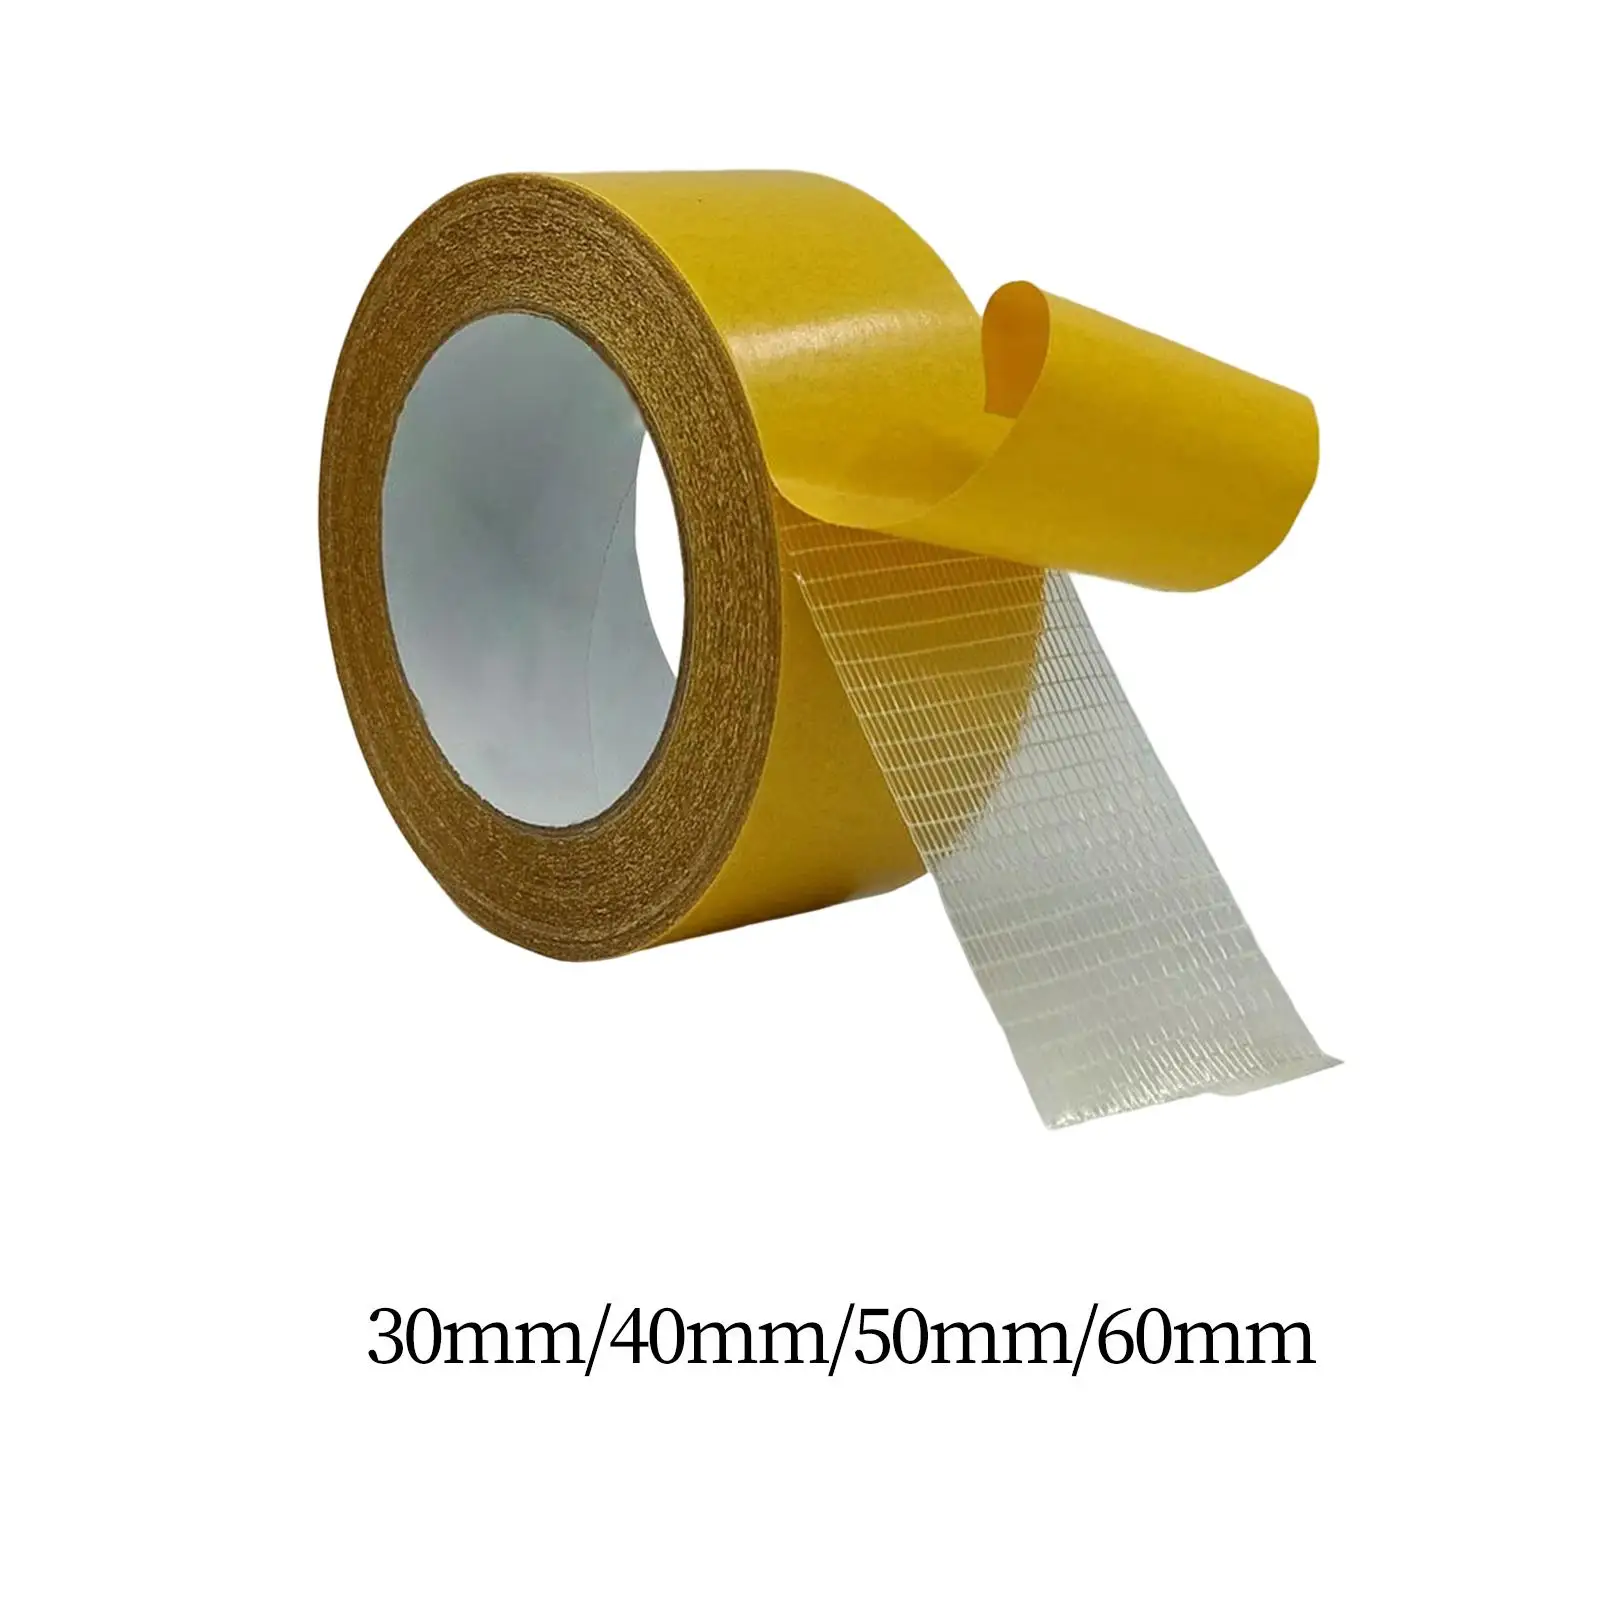 Filament Strapping Tape Crafts Reinforced Packing Tape for Carpet Photo Frame Fixed